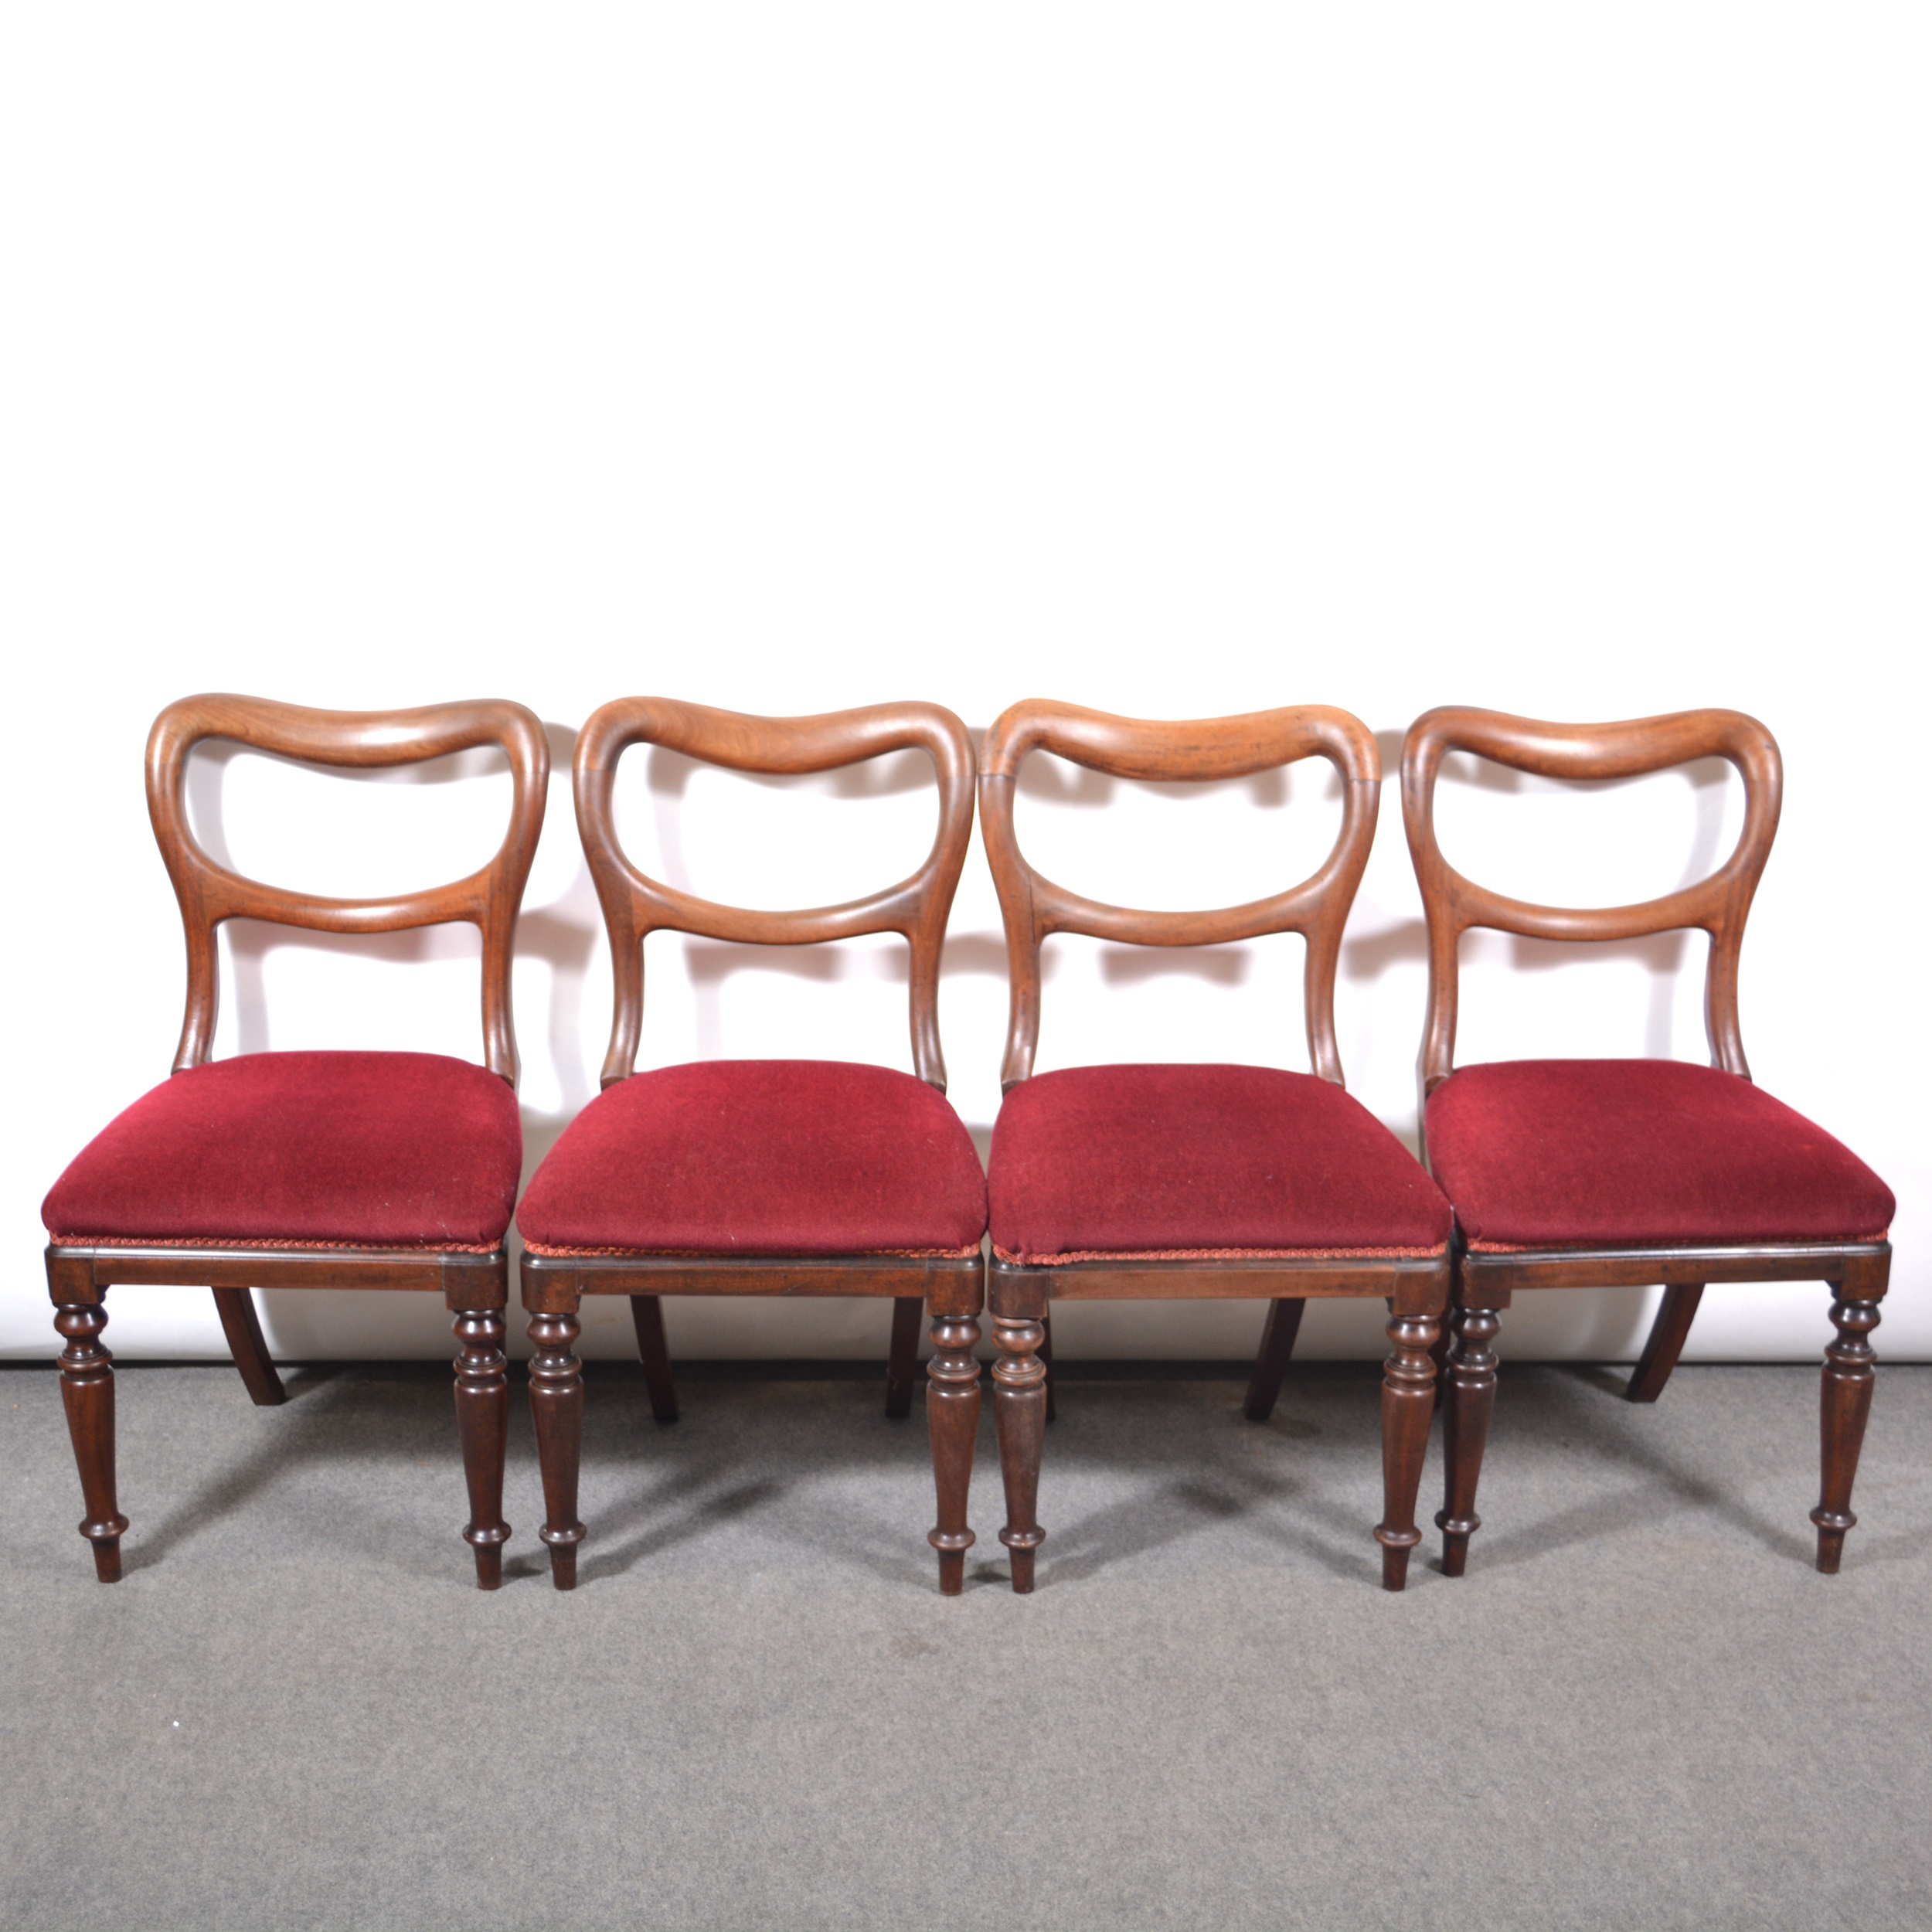 Set of four Victorian mahogany hoop-back dining chairs,